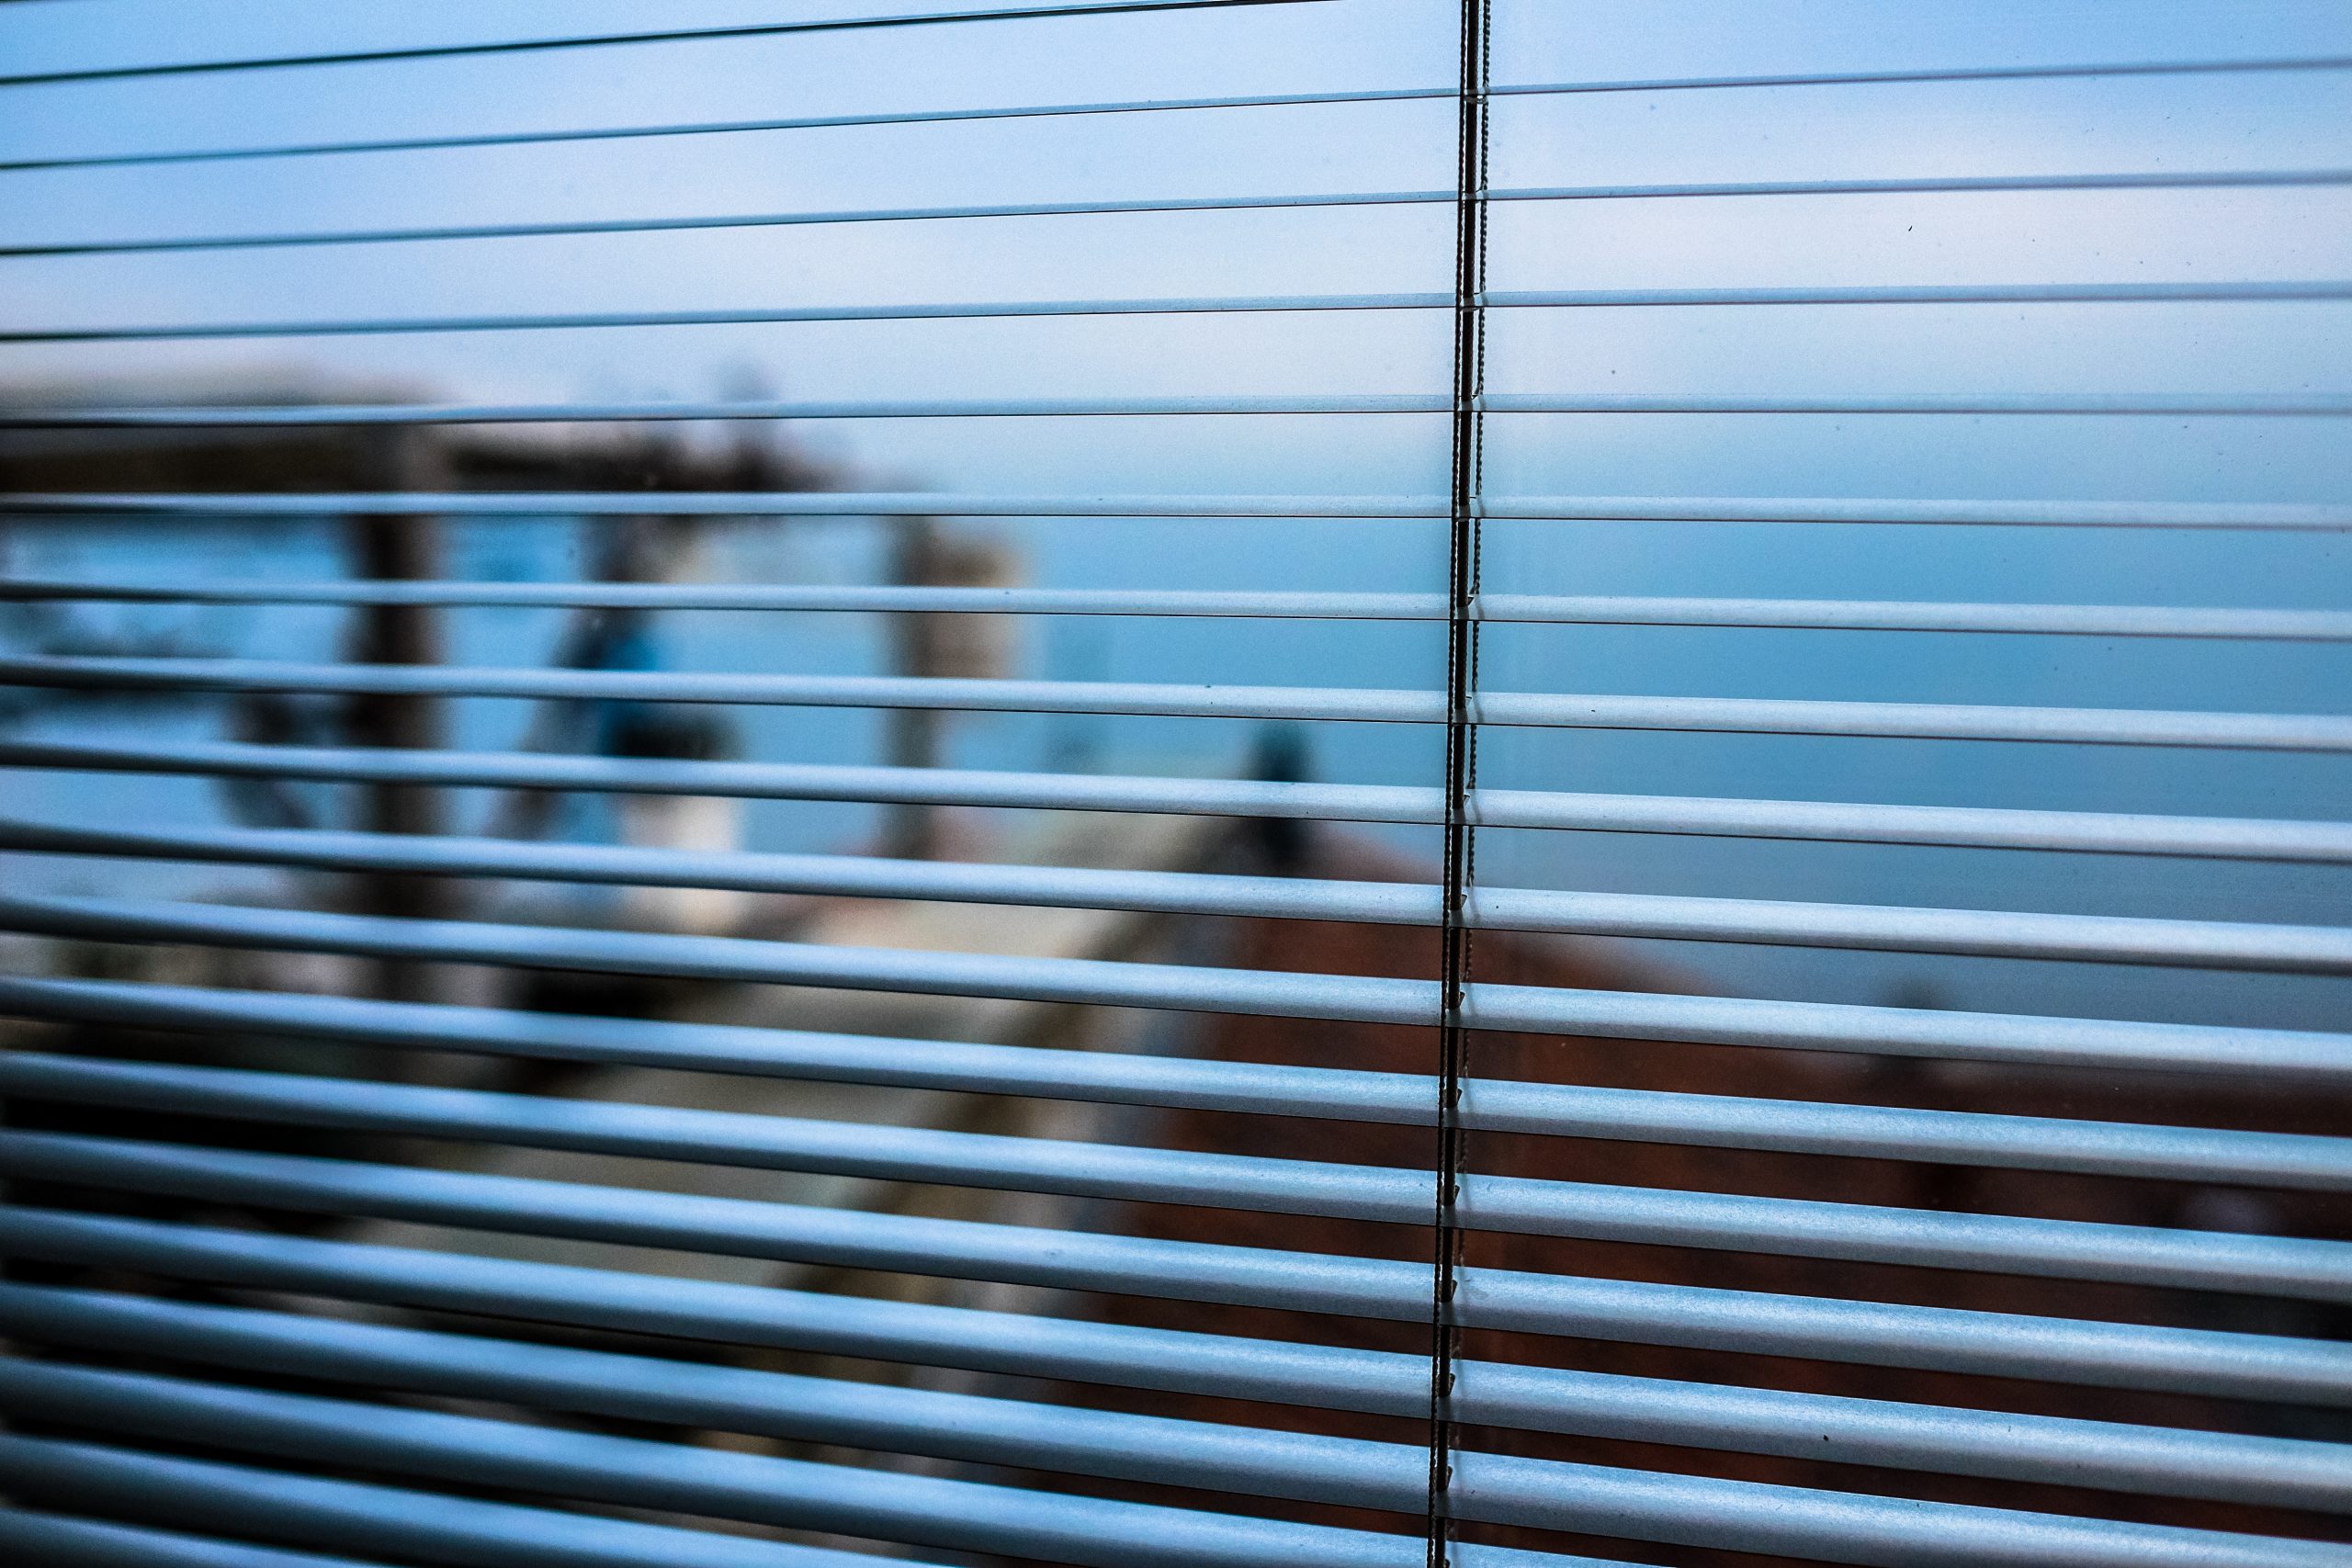 Choosing the Right Window Blinds for Your Home